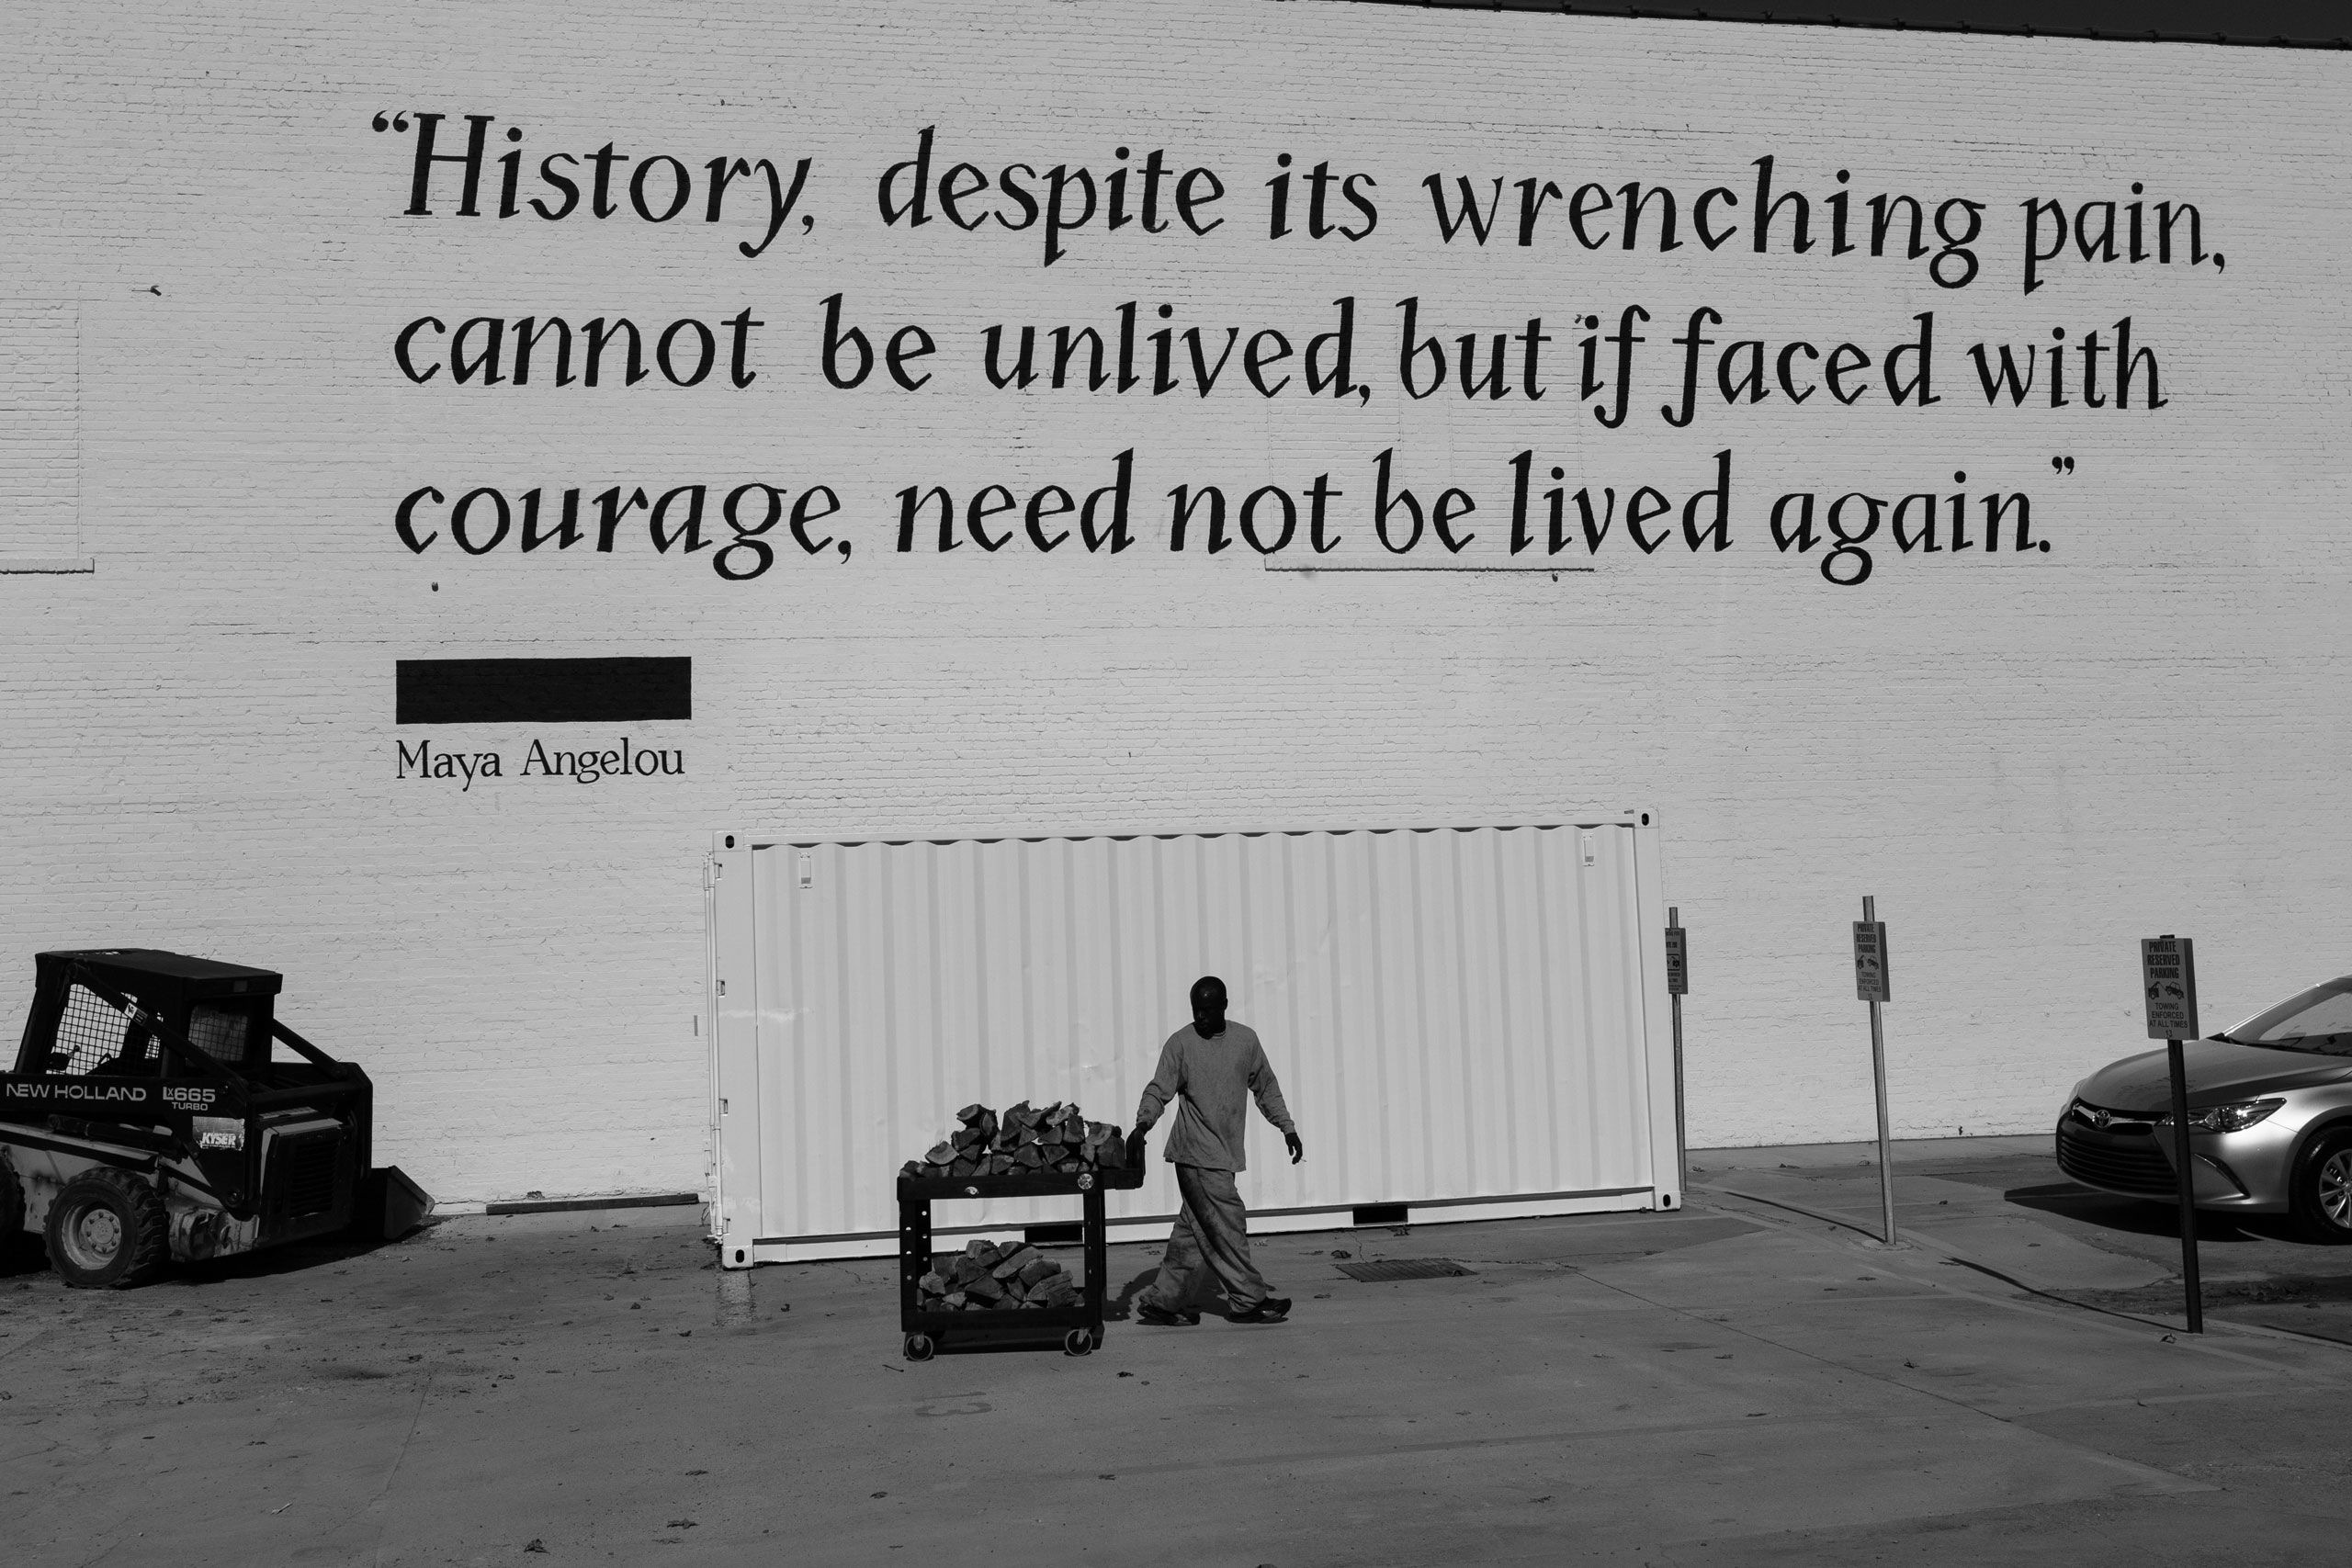 A quote from Maya Angelou is painted on the brick wall of the Legacy Museum: "History, despite its wrenching pain, cannot be unlived, but if faced with courage, need not be lived again."